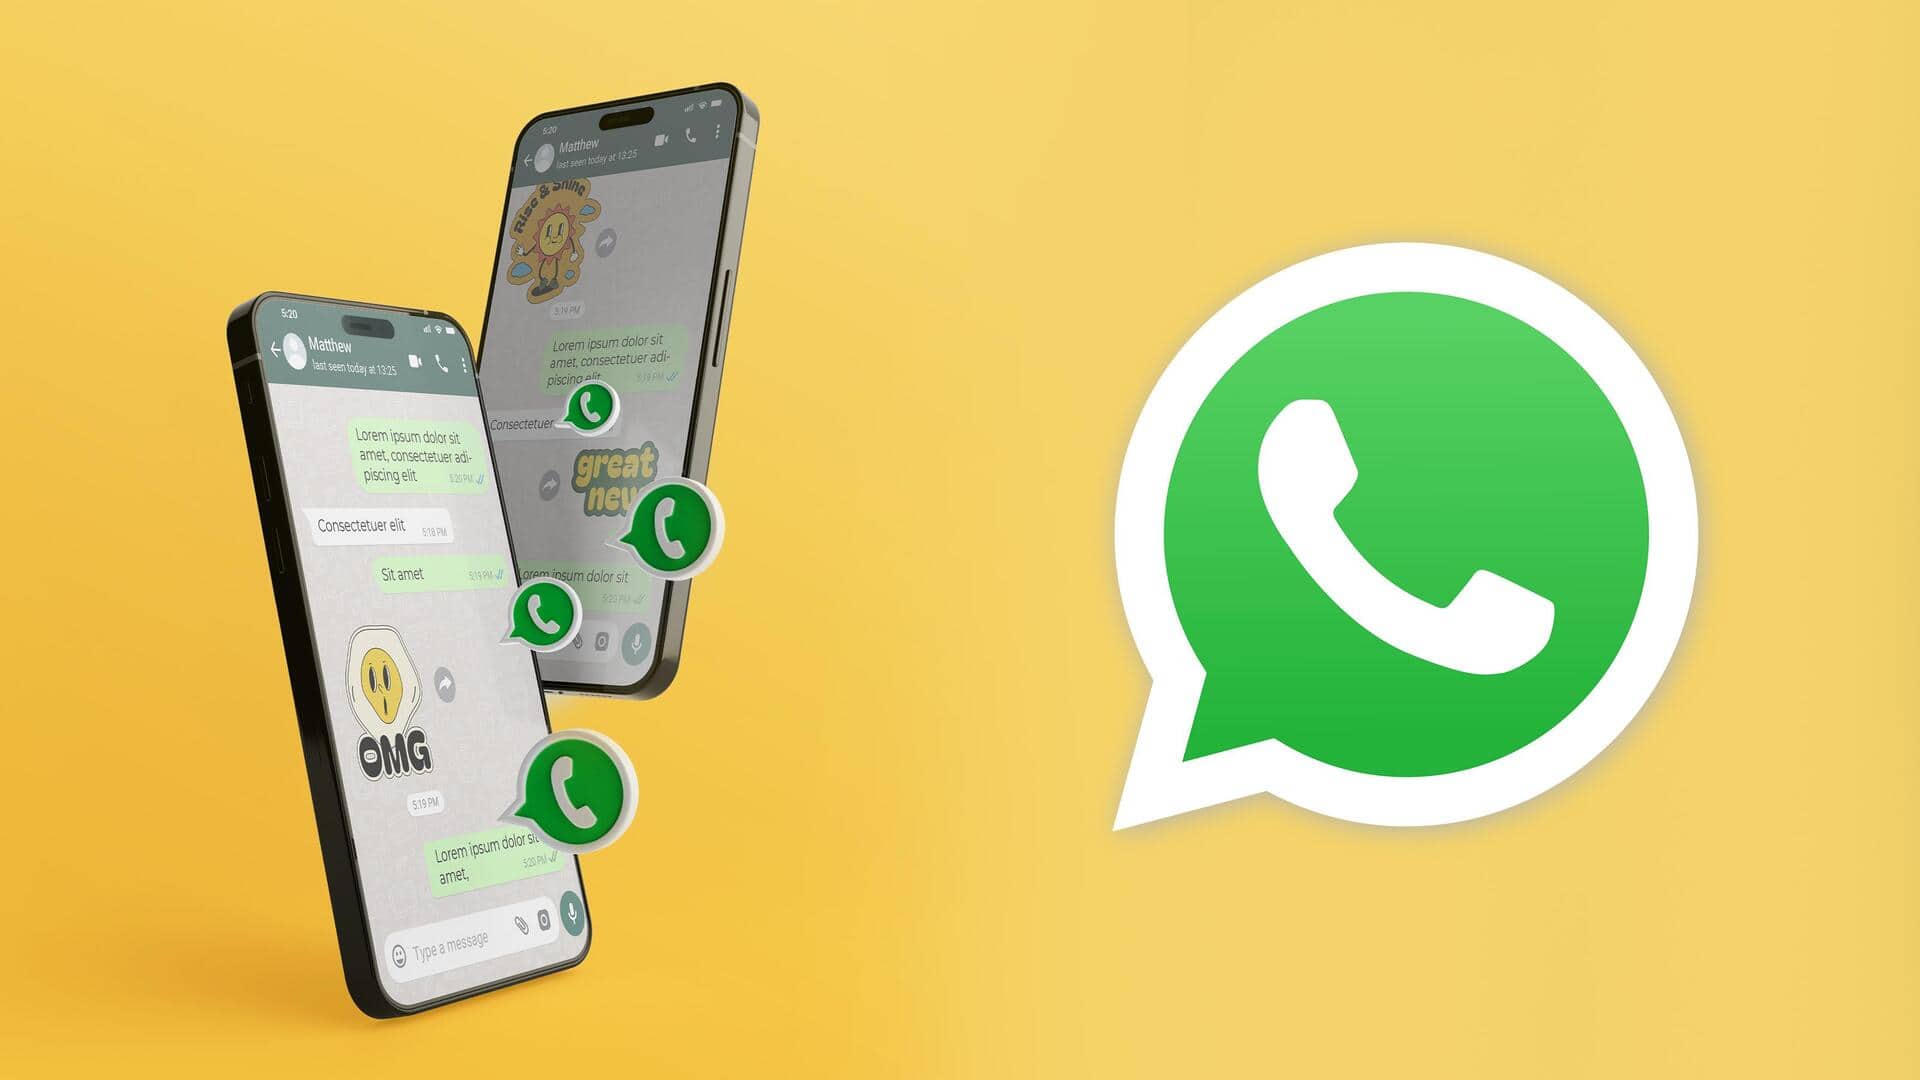 Want to check deleted WhatsApp messages? Use this app